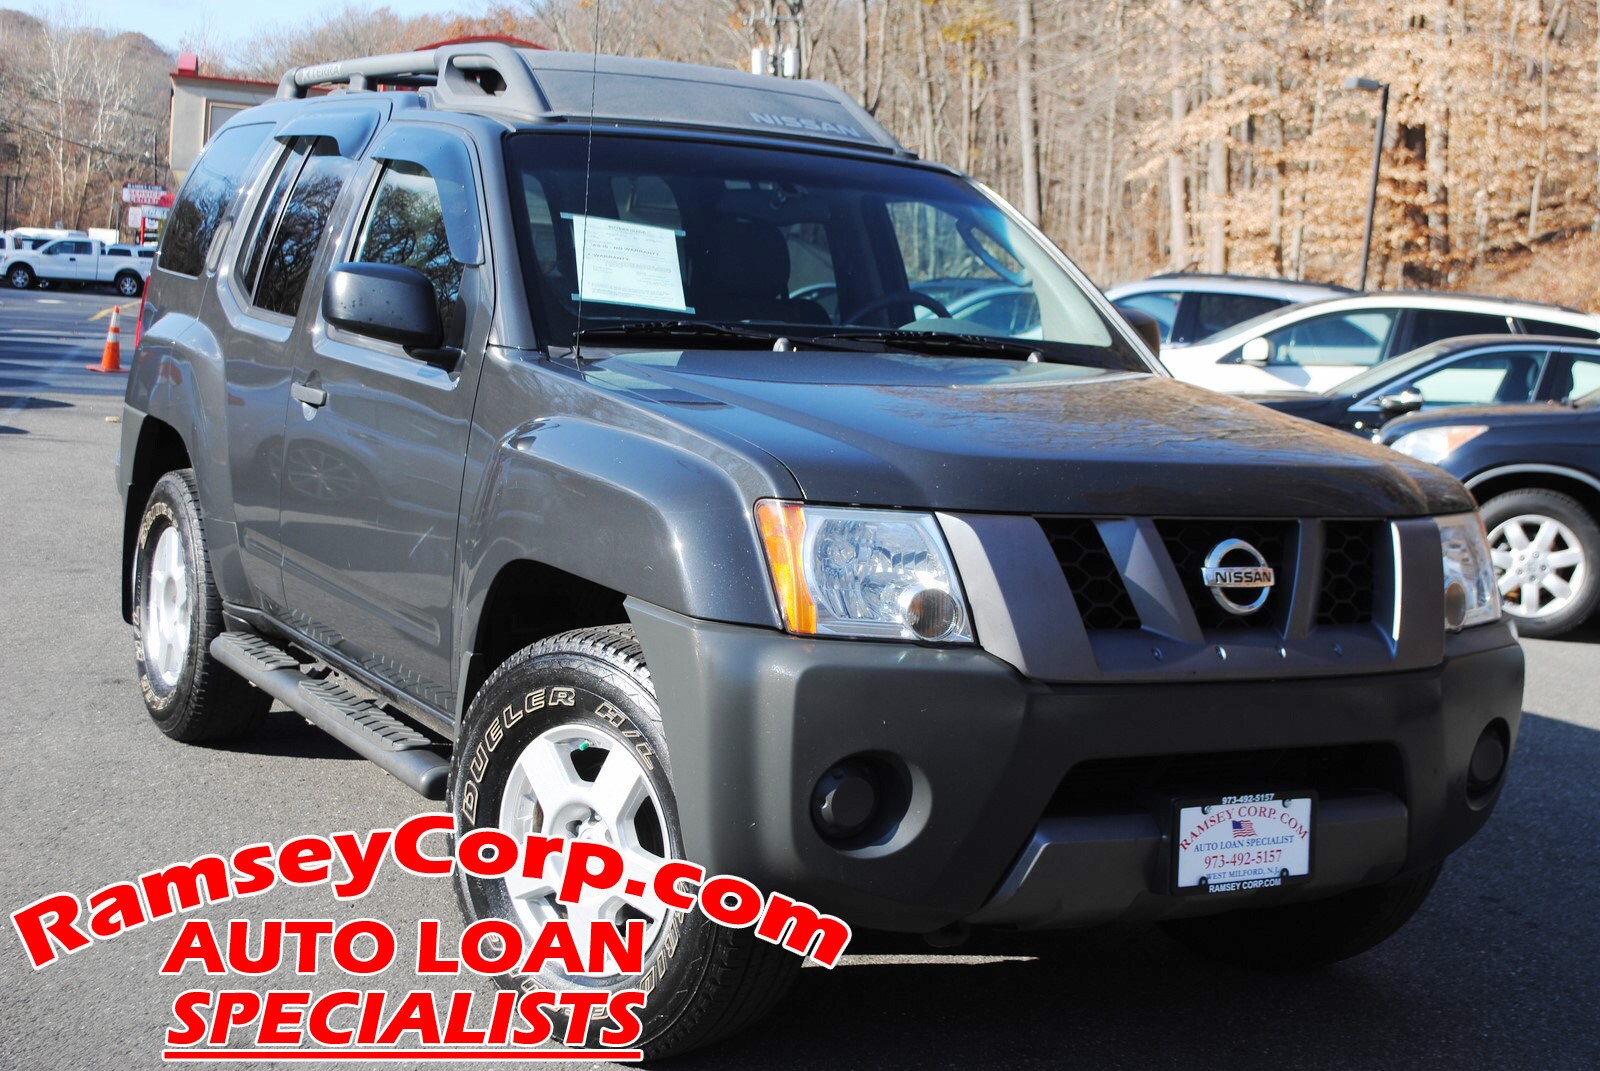 used 2007 nissan xterra for sale at ramsey corp vin 5n1an08w47c518177 ramsey corp